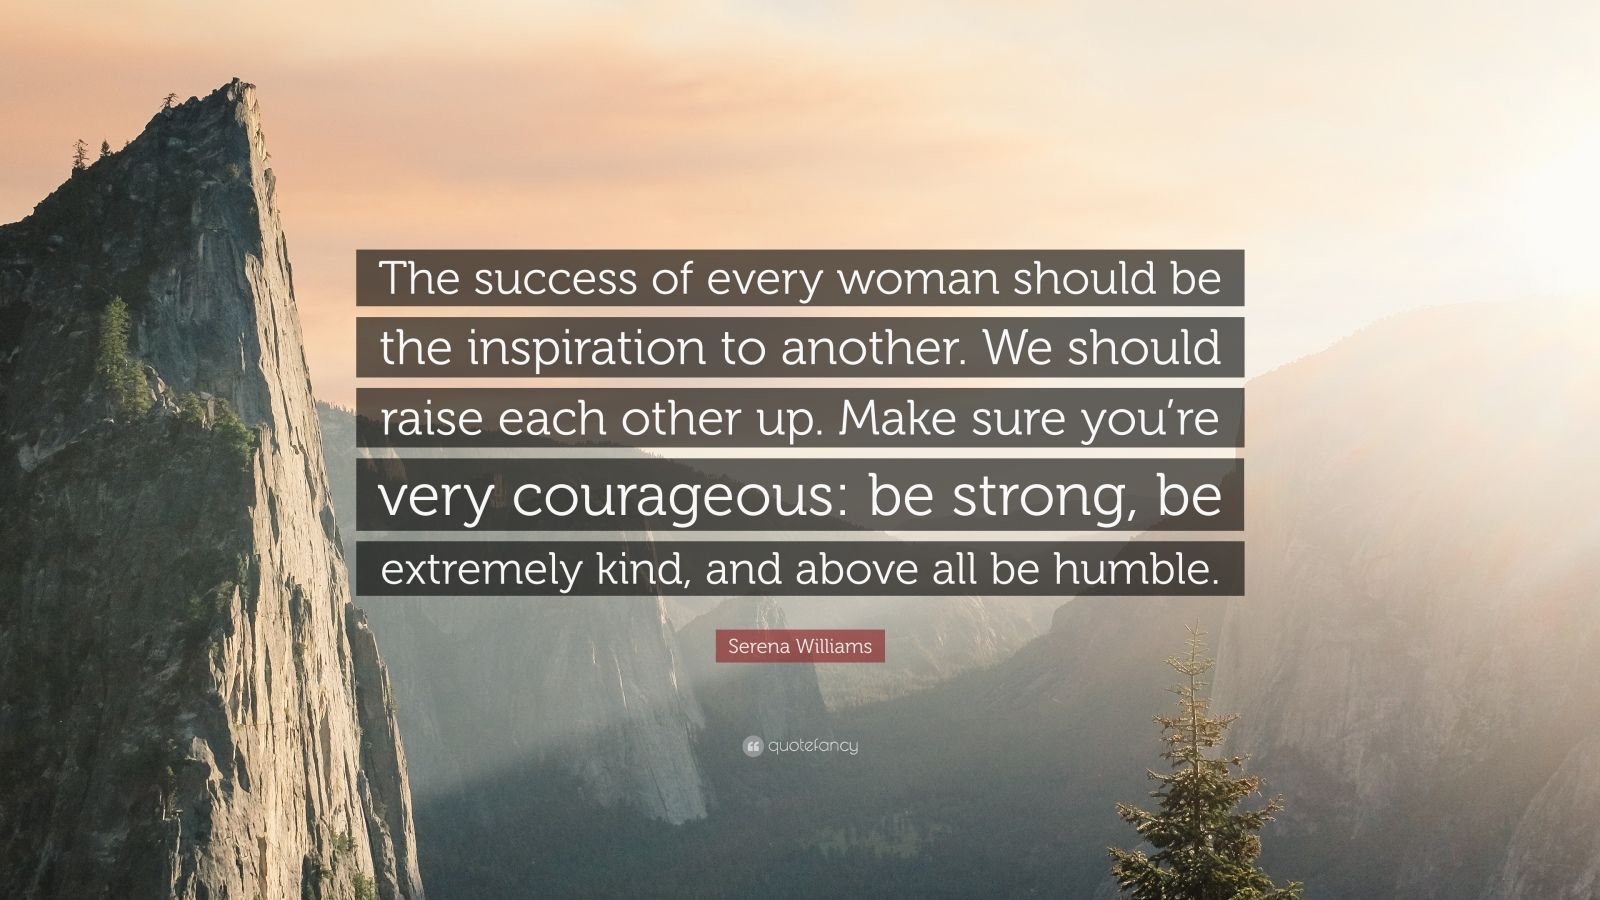 Serena Williams Quote: “The success of every woman should be the  inspiration to another. We should raise each other up. Make sure you're  very co...”